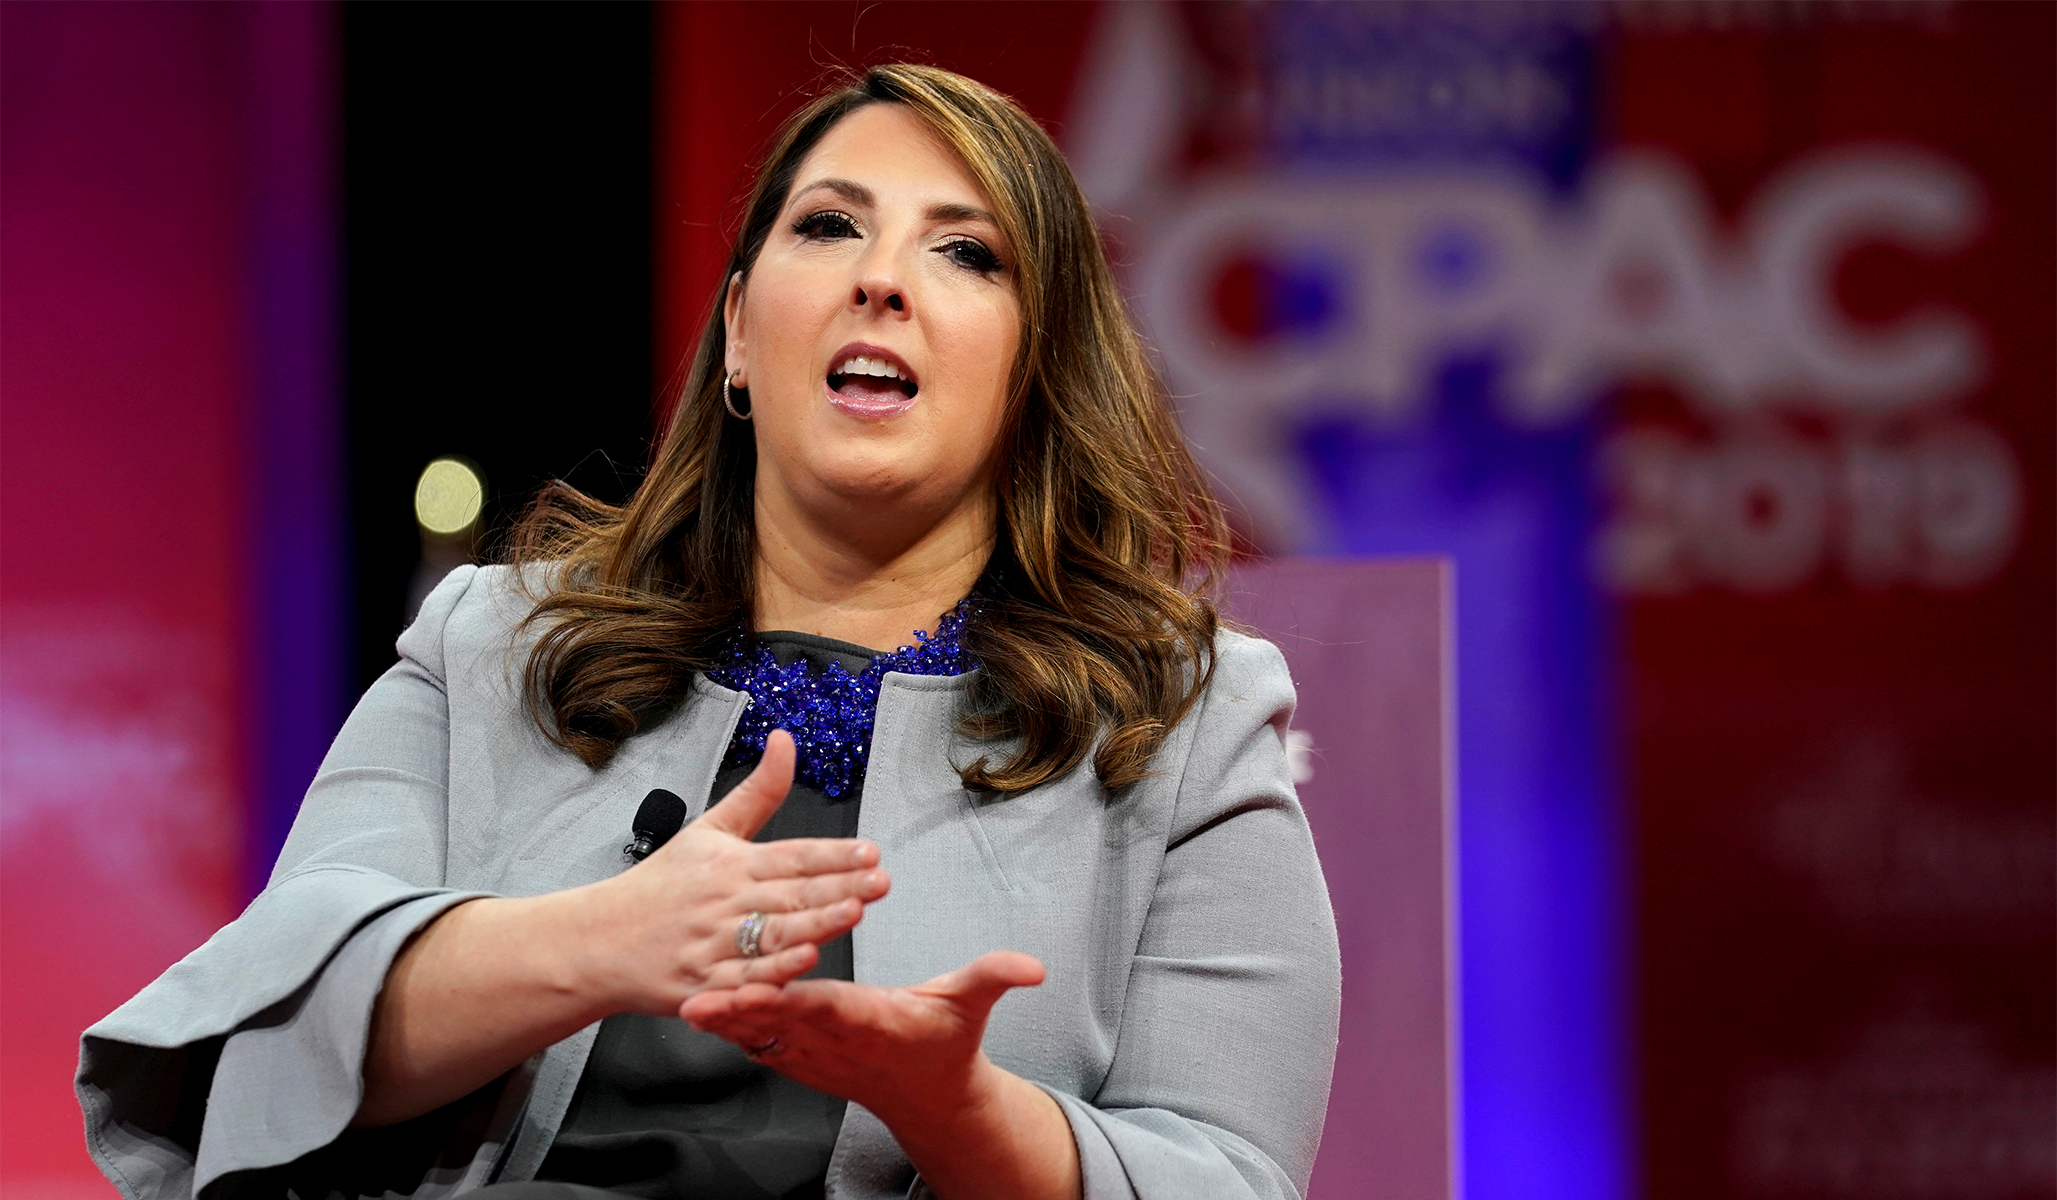 RNC Chair: Virginia Election Was Successful ‘Test Run’ for 2022 Midterm Strategy